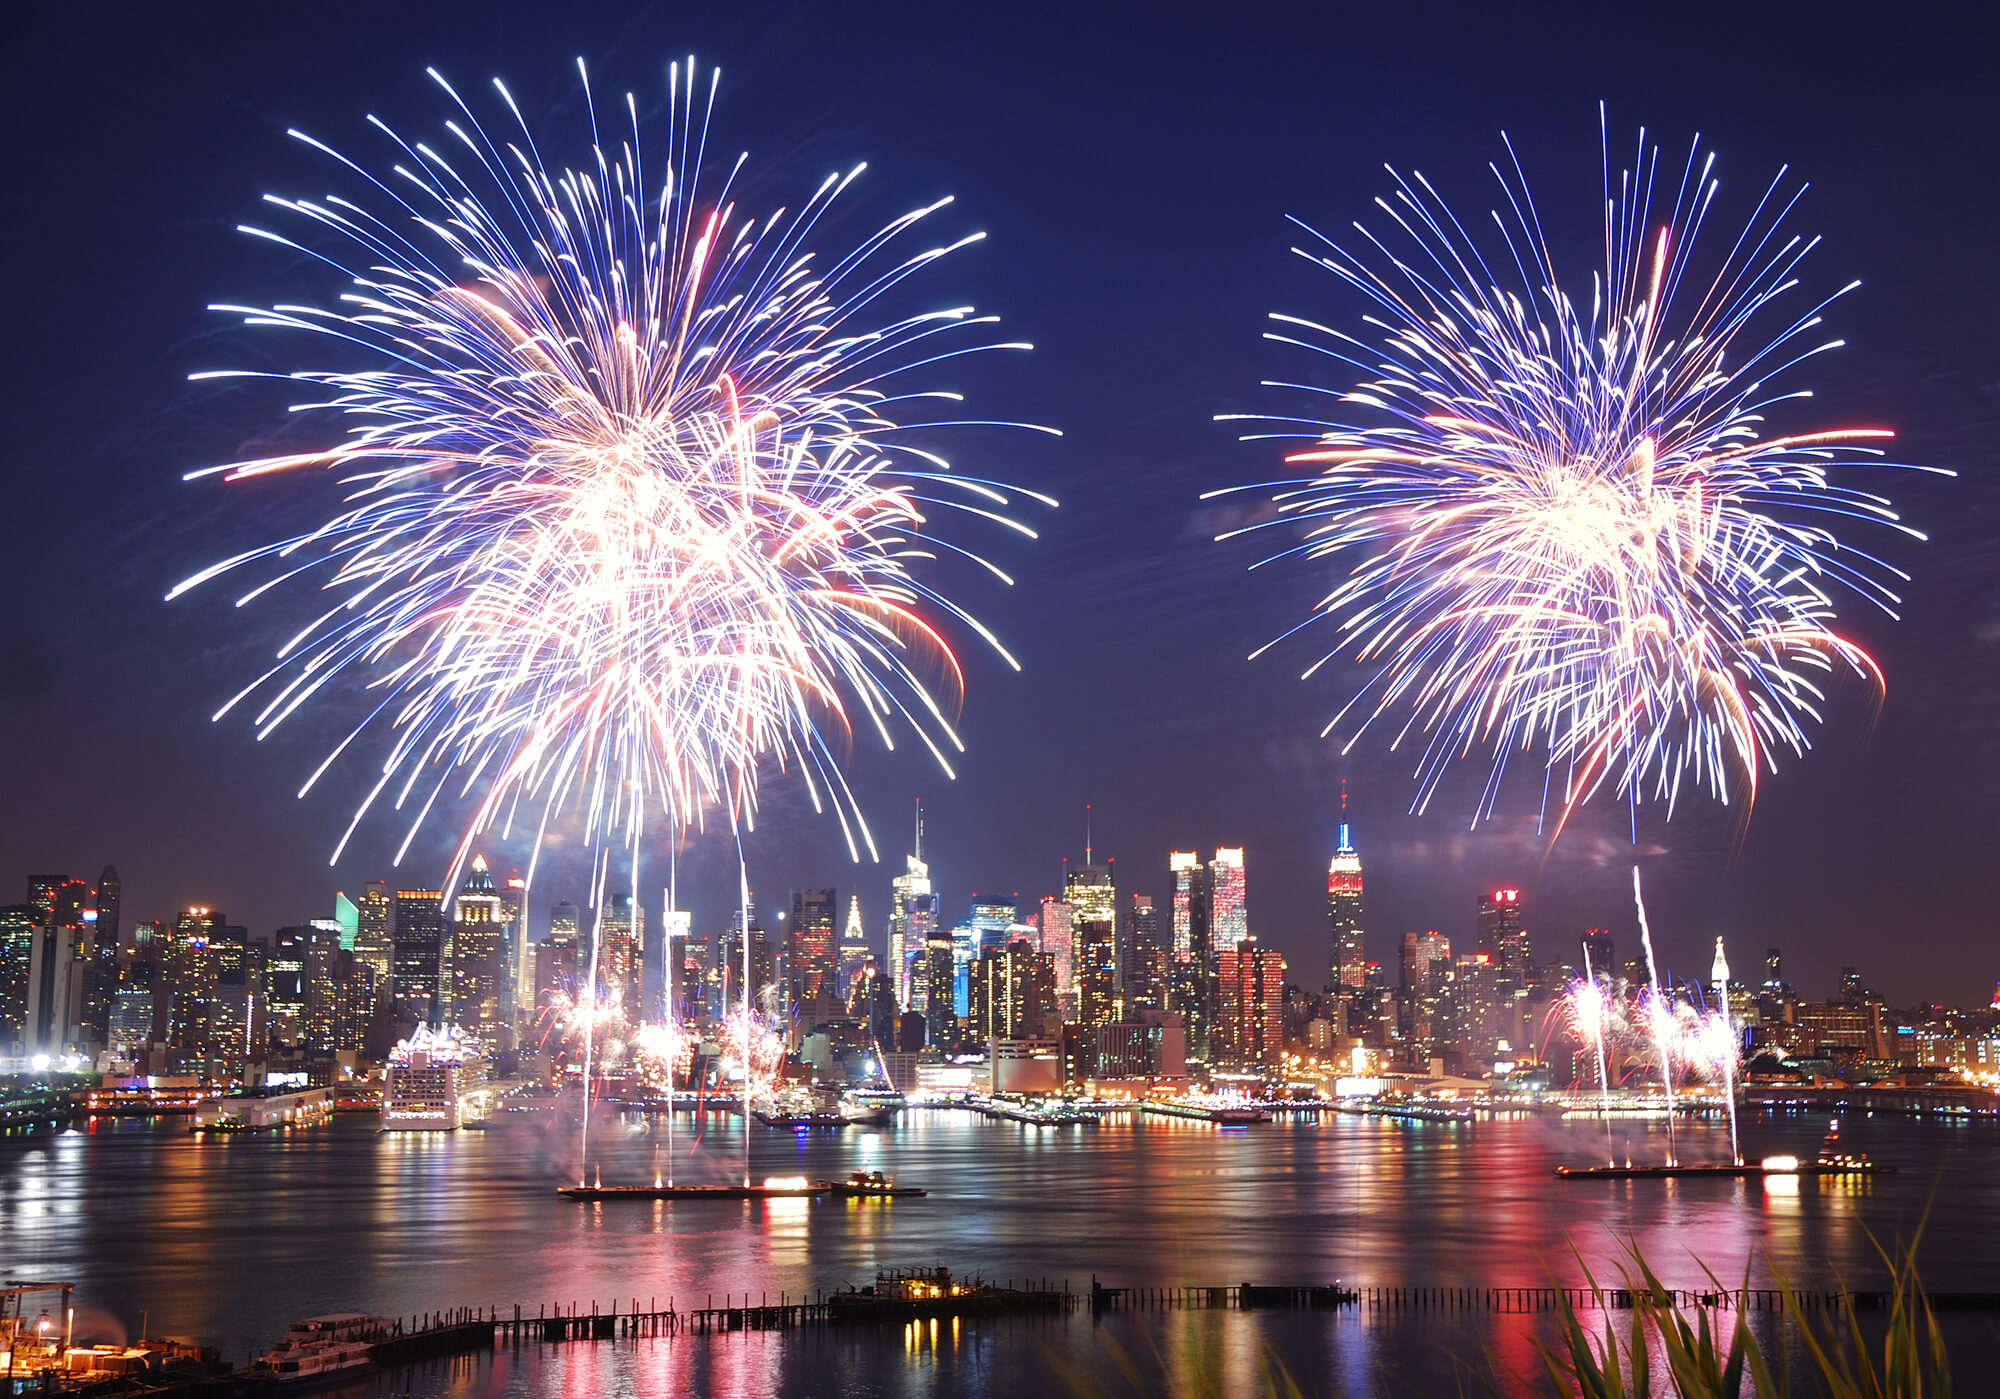 Top 5 Destinations to Celebrate the New Year